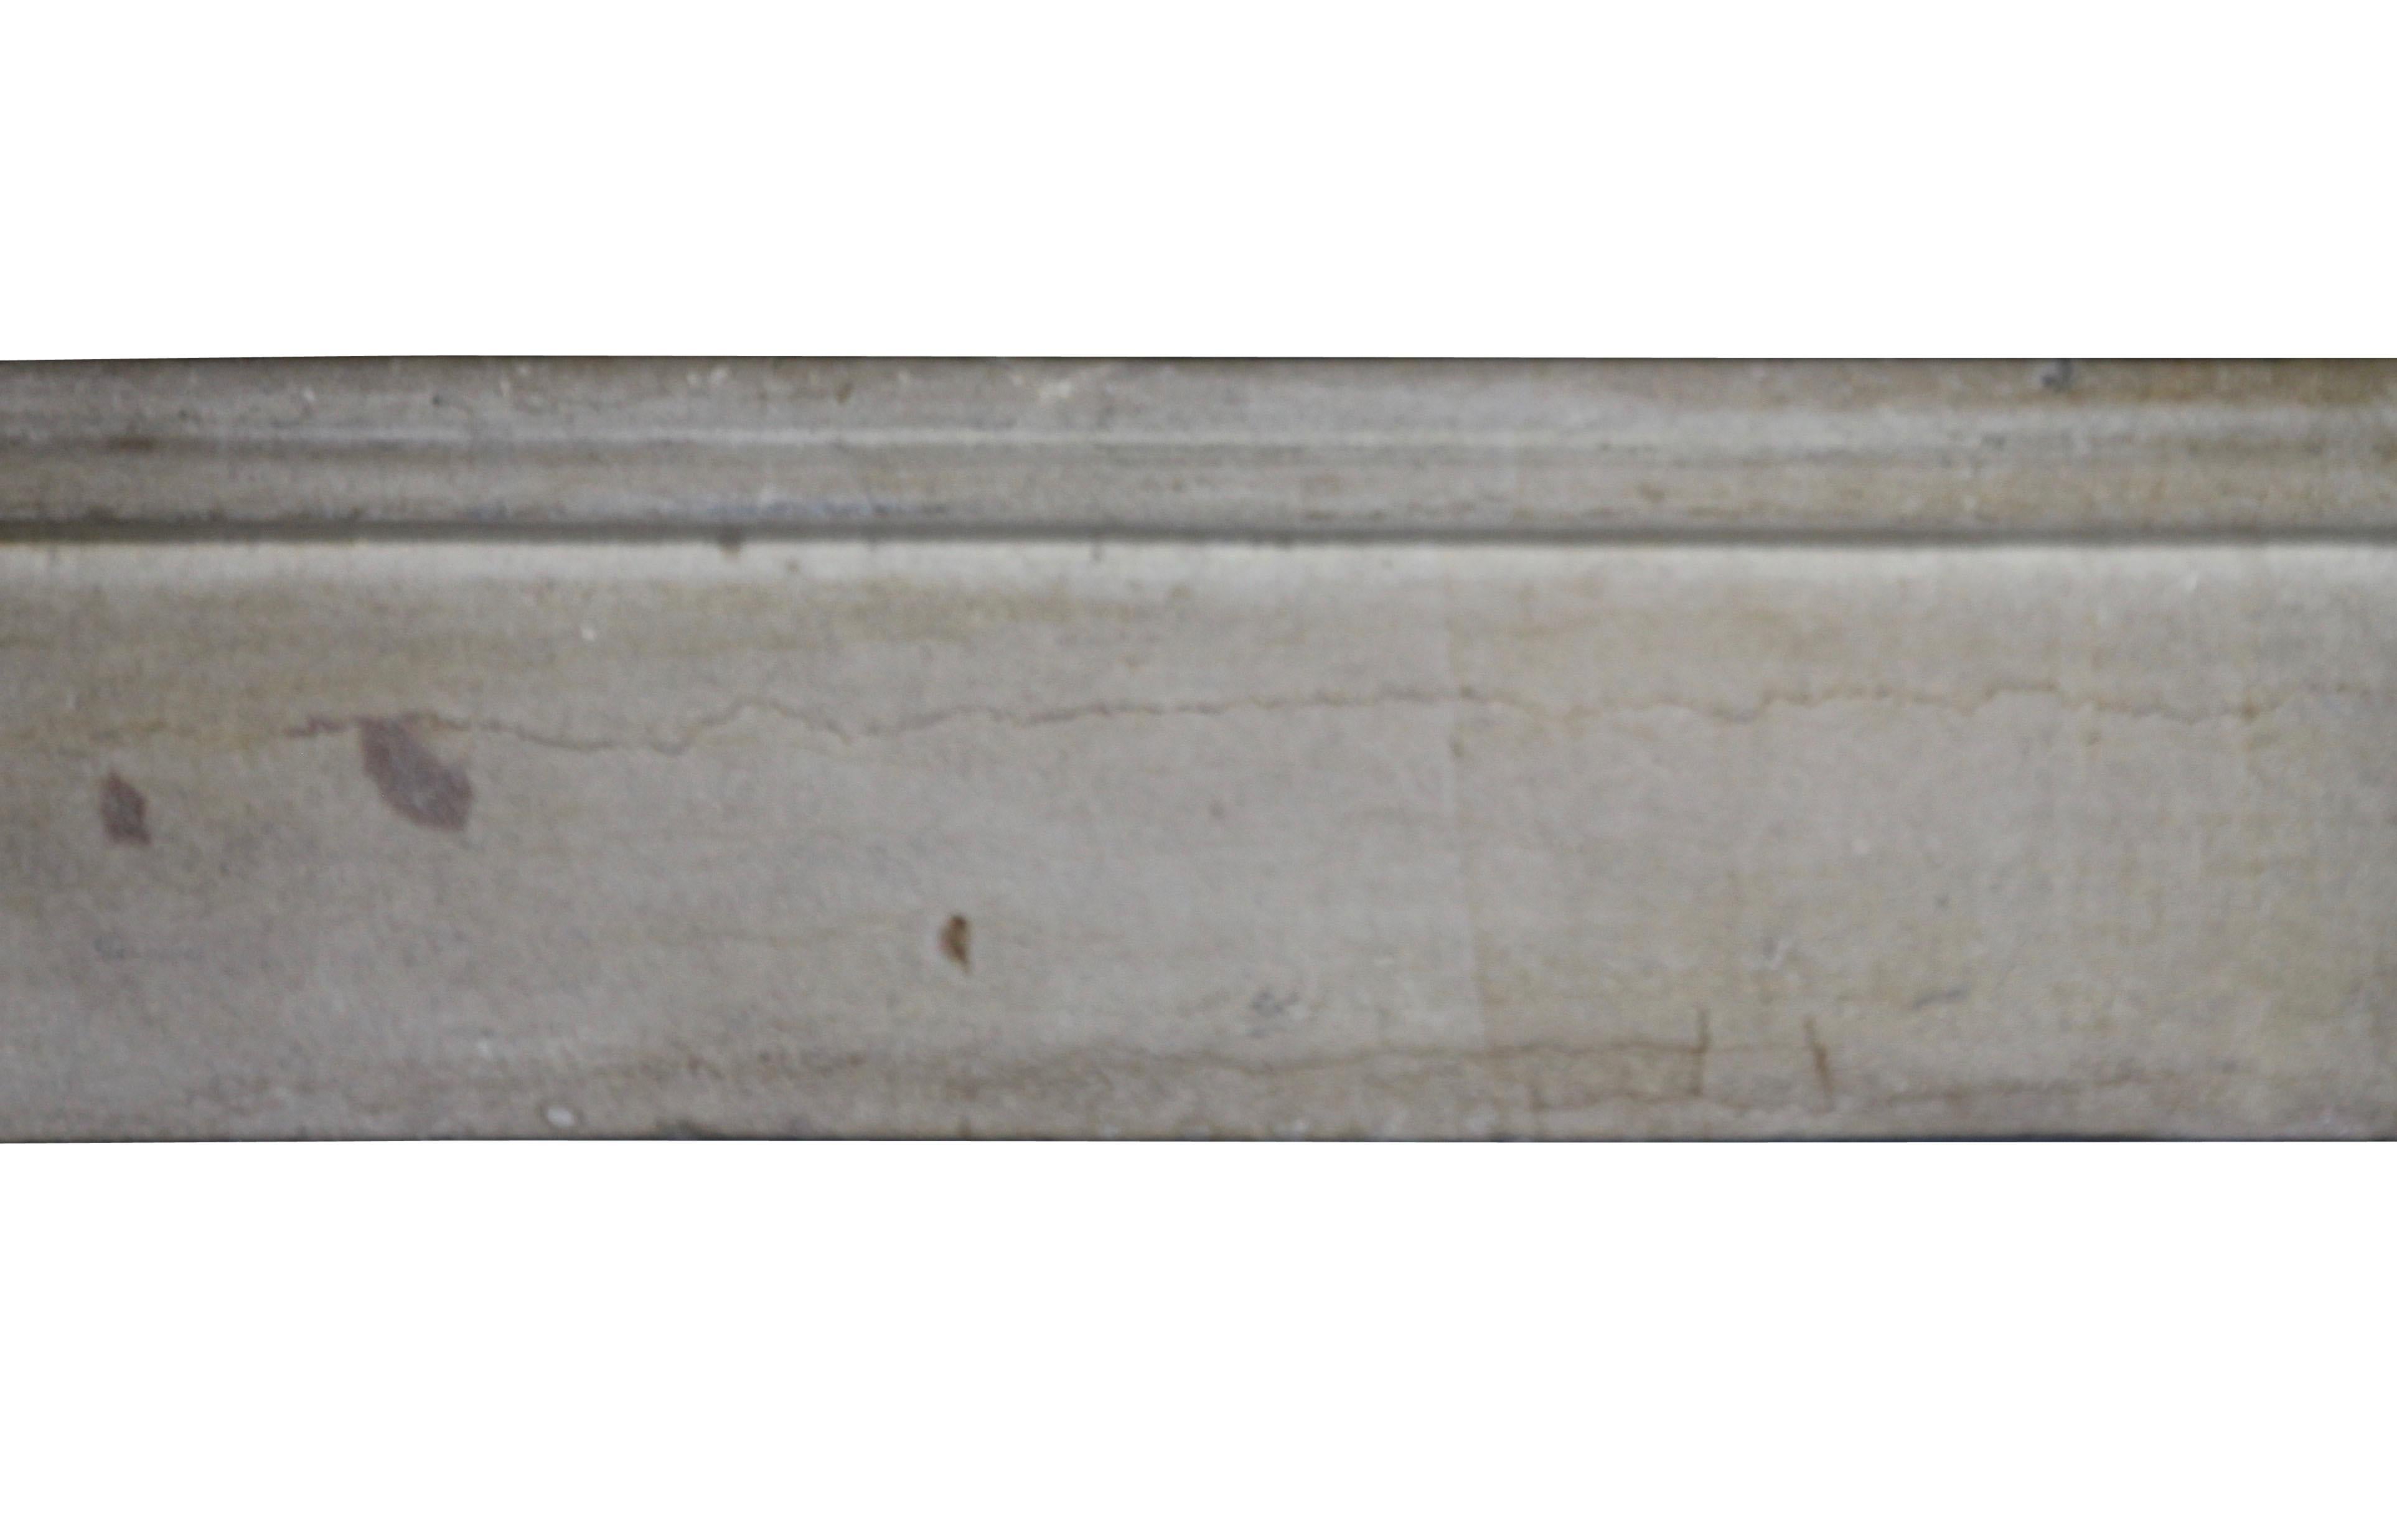 This is a original petite bourguignon antique fireplace mantel in a Burgundy marble hard stone. It is waxed and has a very nice patina. A small piece fit for different interior designs.
Measures:
117 cm EW 46.06